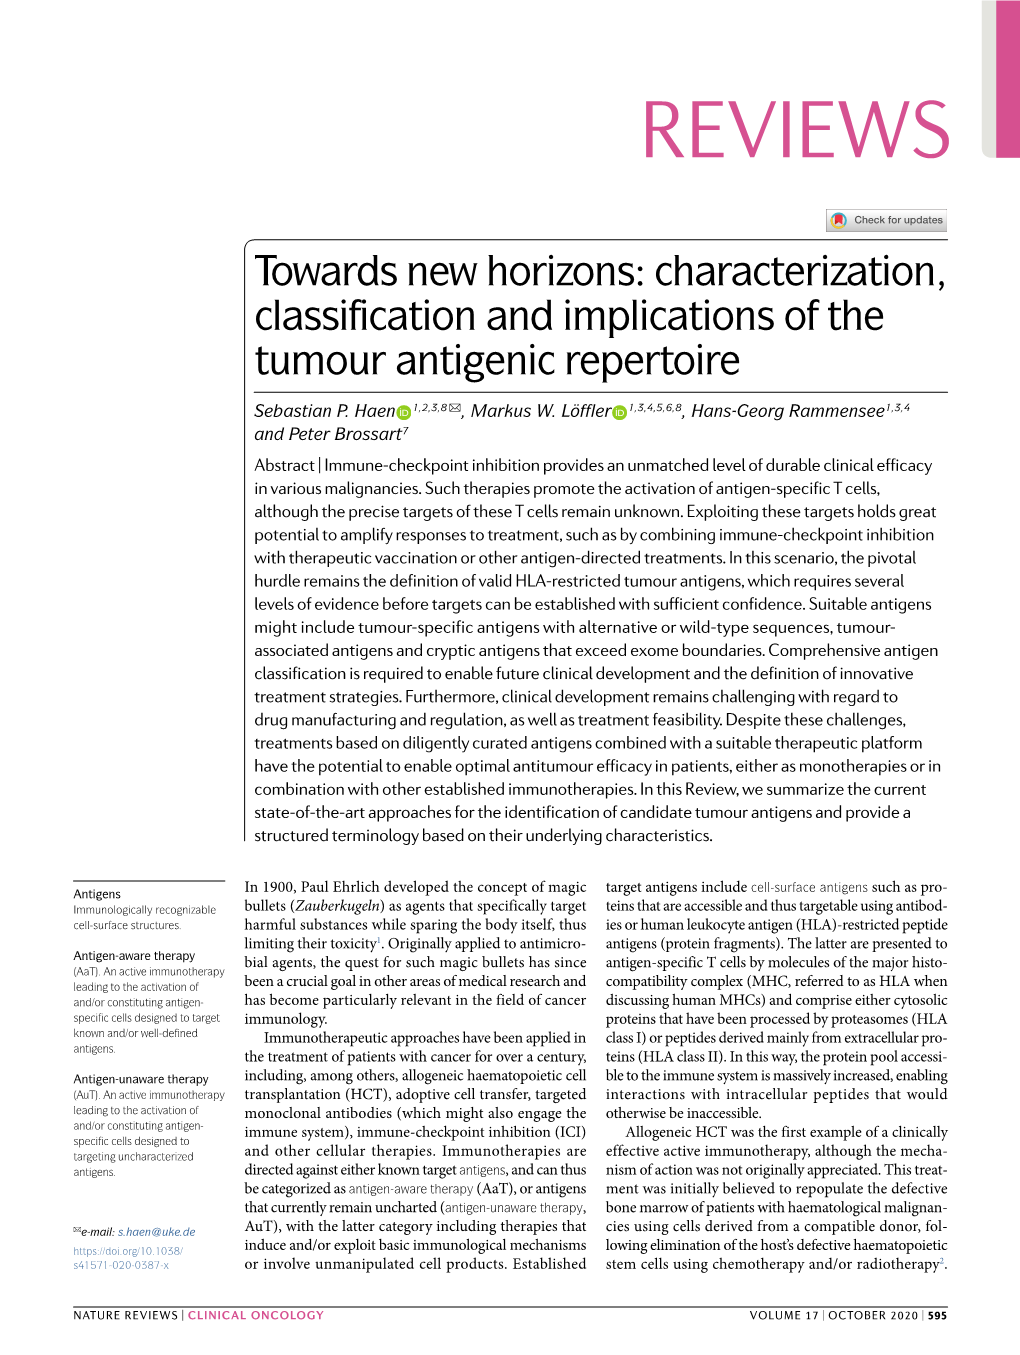 Characterization, Classification and Implications of the Tumour Antigenic Repertoire